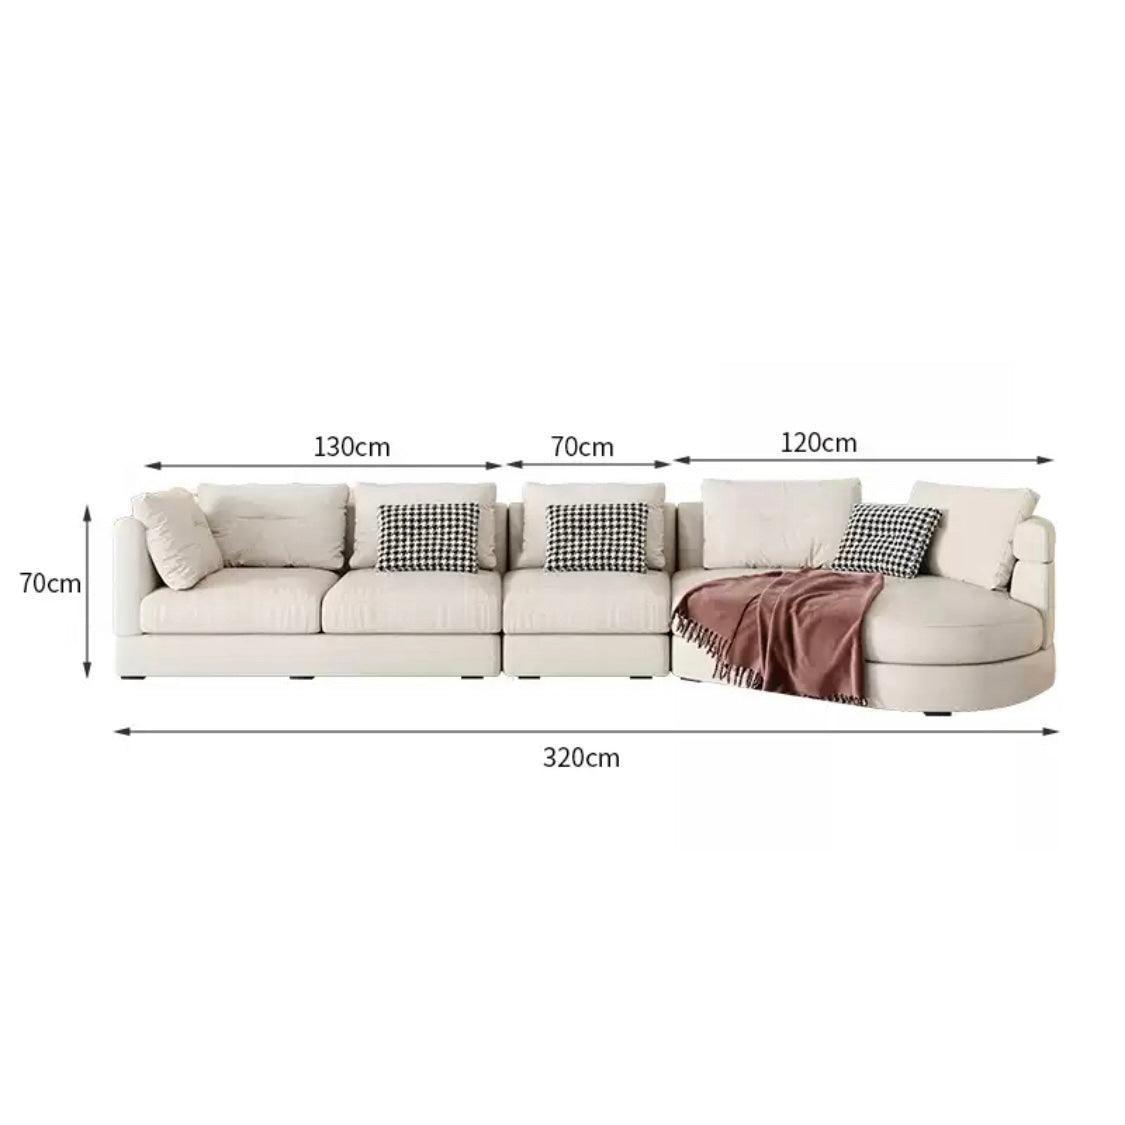 home-atelier-f31a Suede Fabric / Length 320cm with curve chaise / Cream Baxter Designer Sectional Round Chaise Sofa